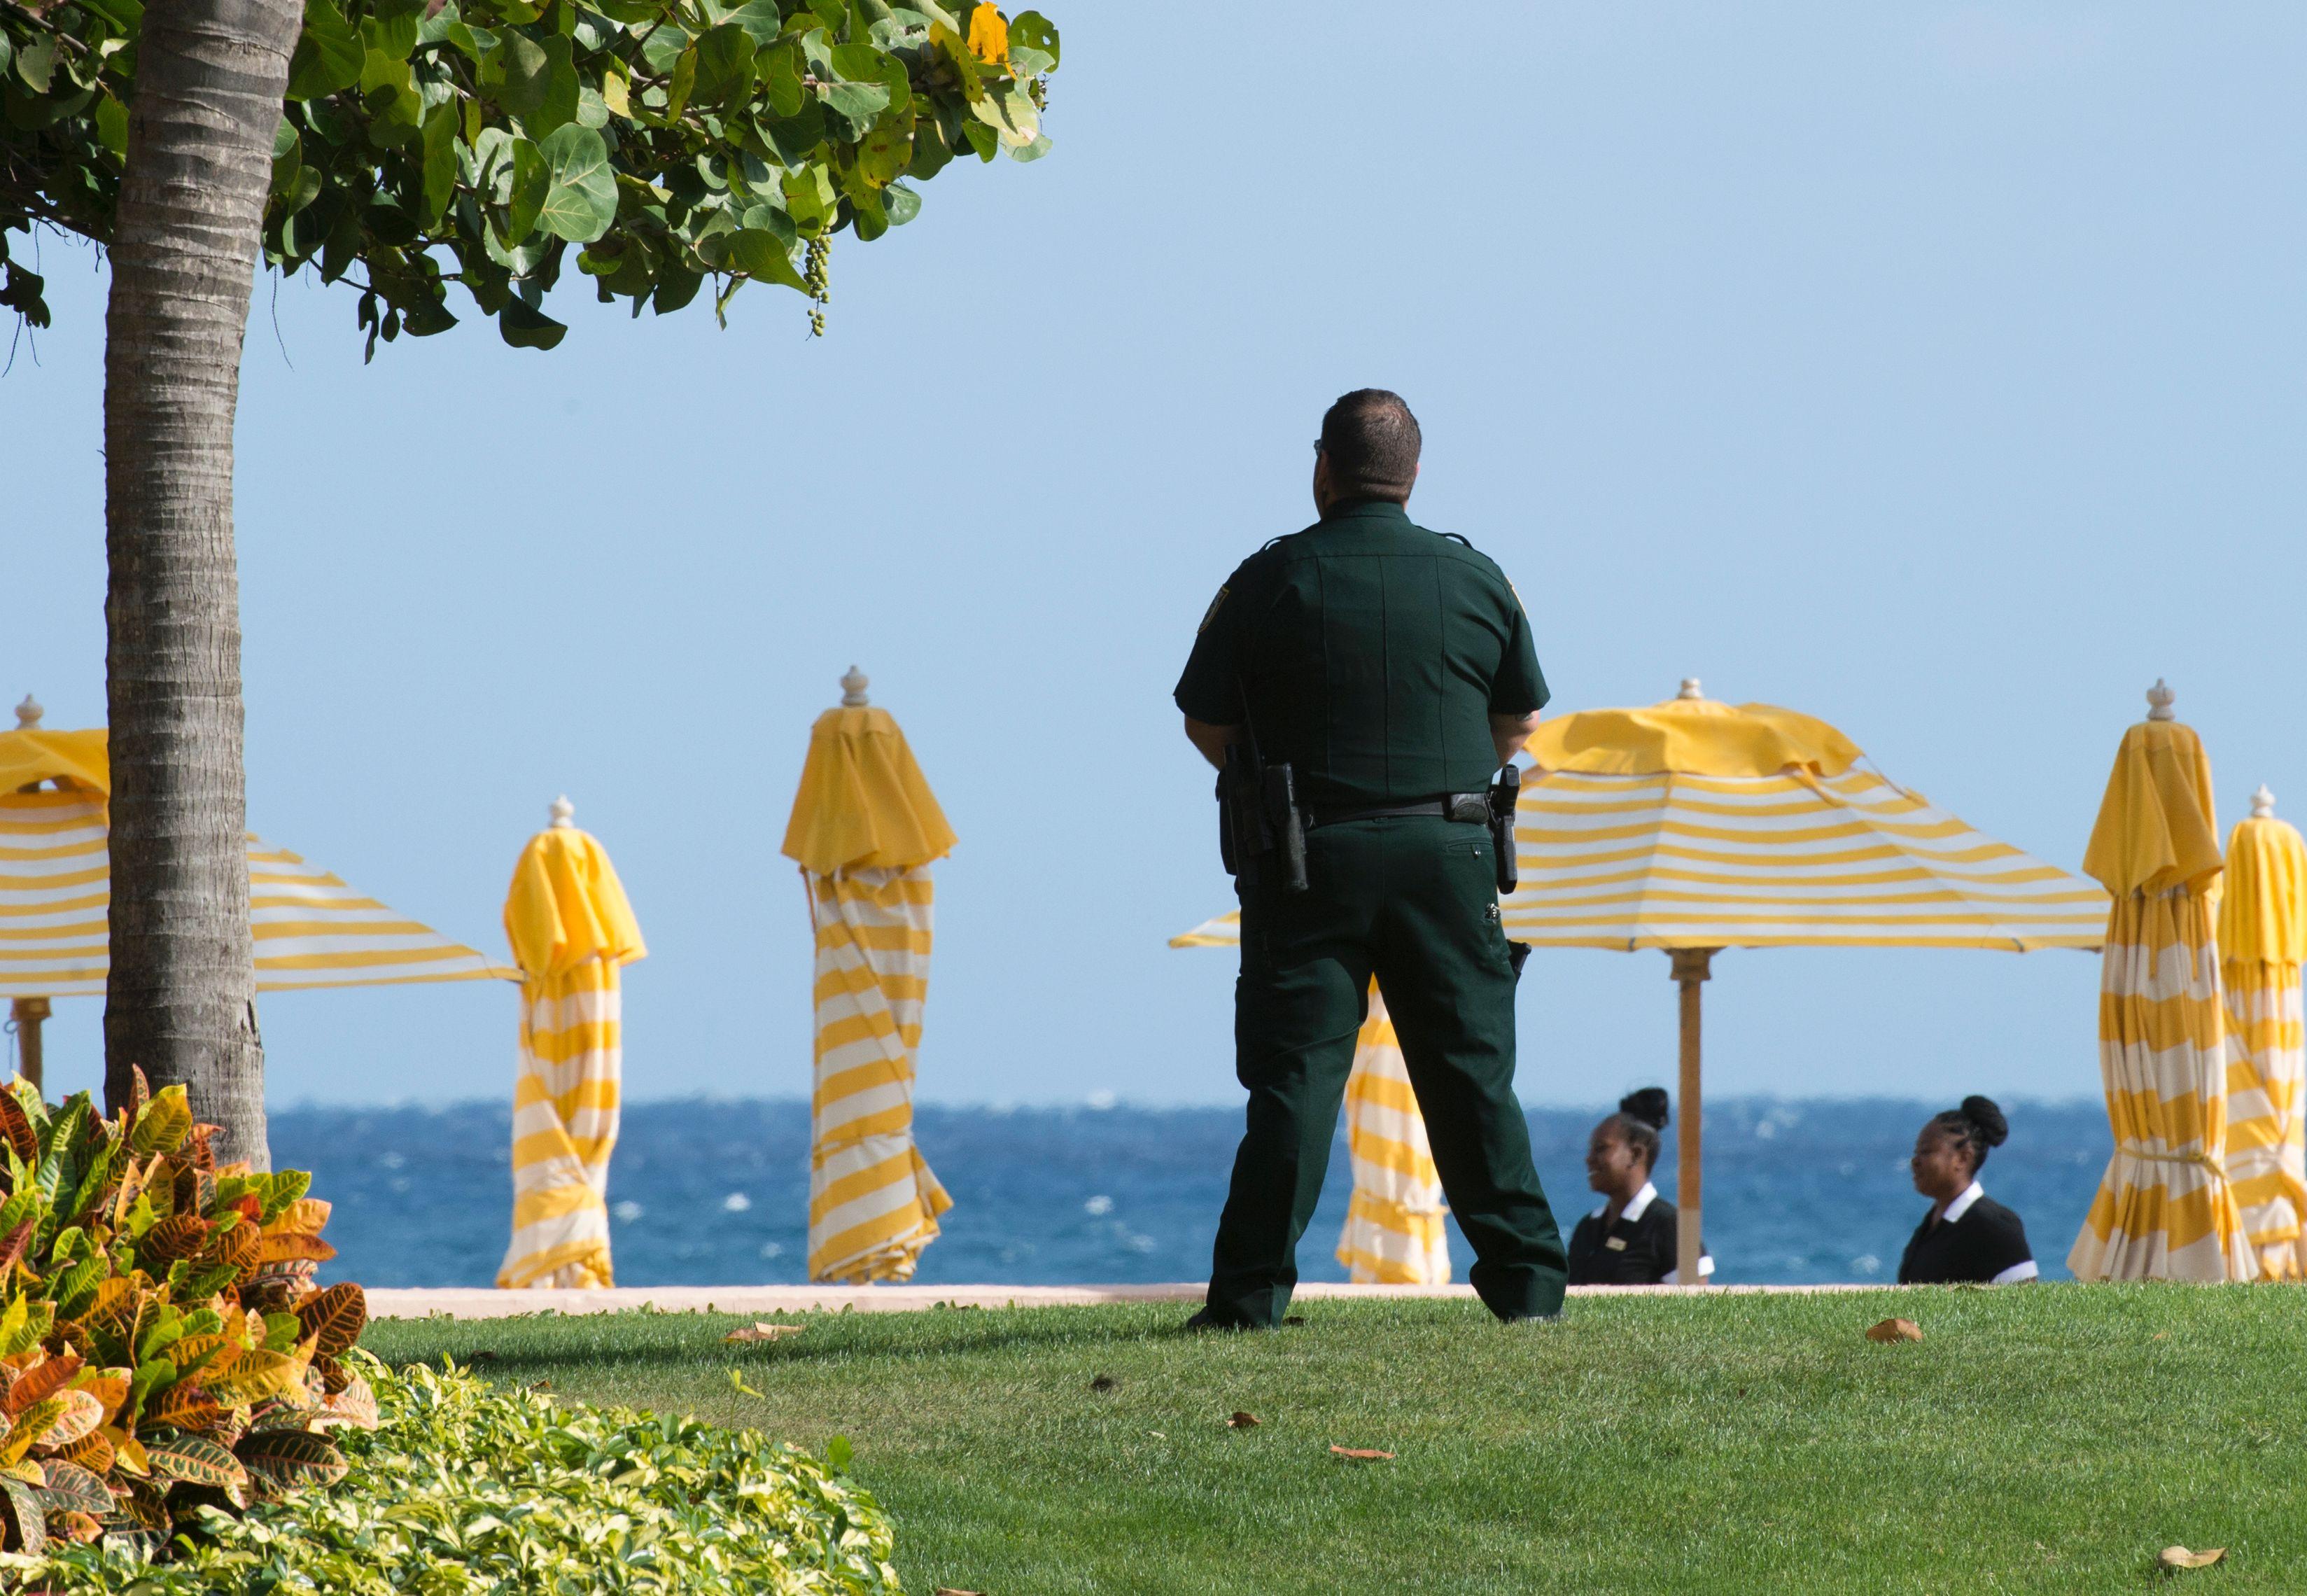 The guard is seen from behind facing a set of beach umbrellas.